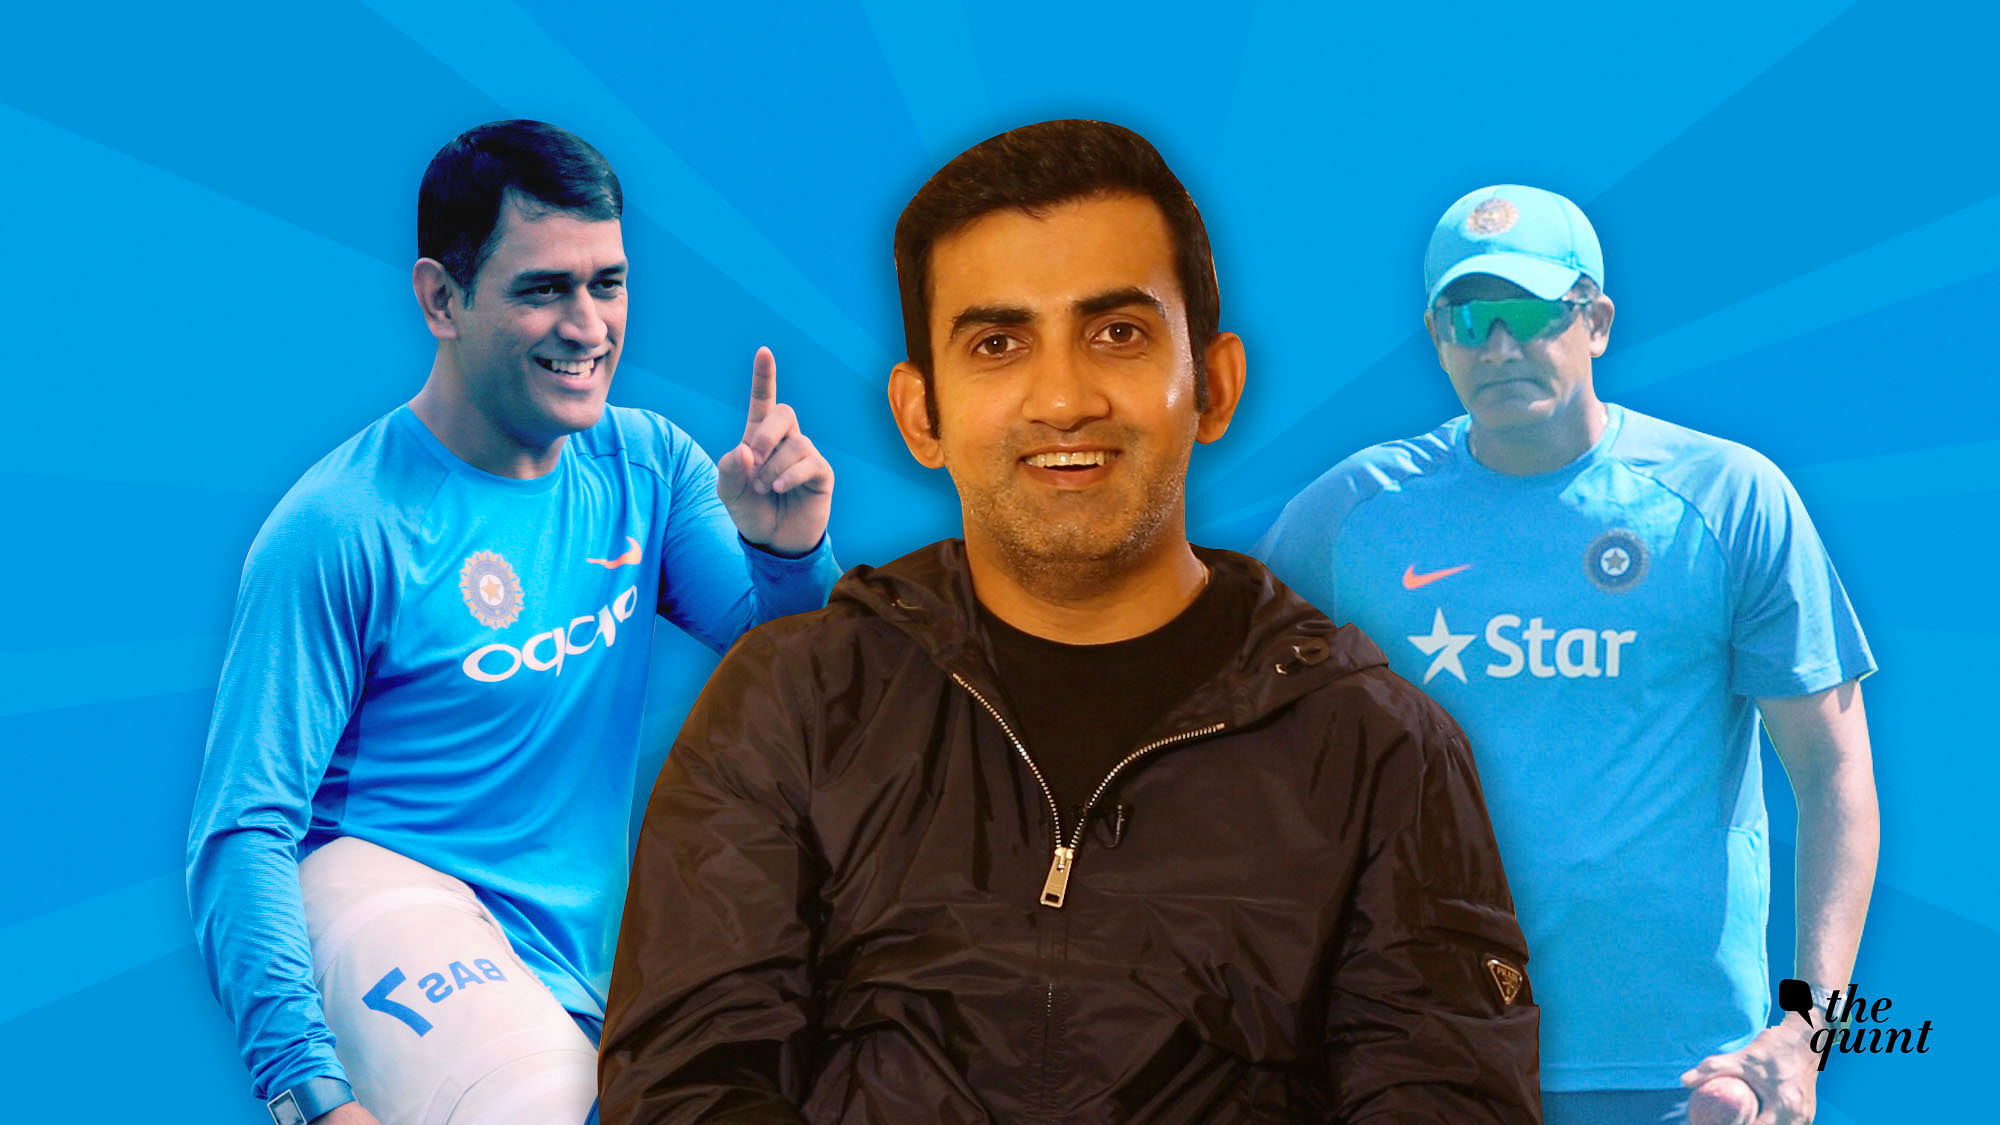 In an exclusive interview with The Quint, Gautam Gambhir talks about his decision to retire, his friendship with MS Dhoni and life after cricket.